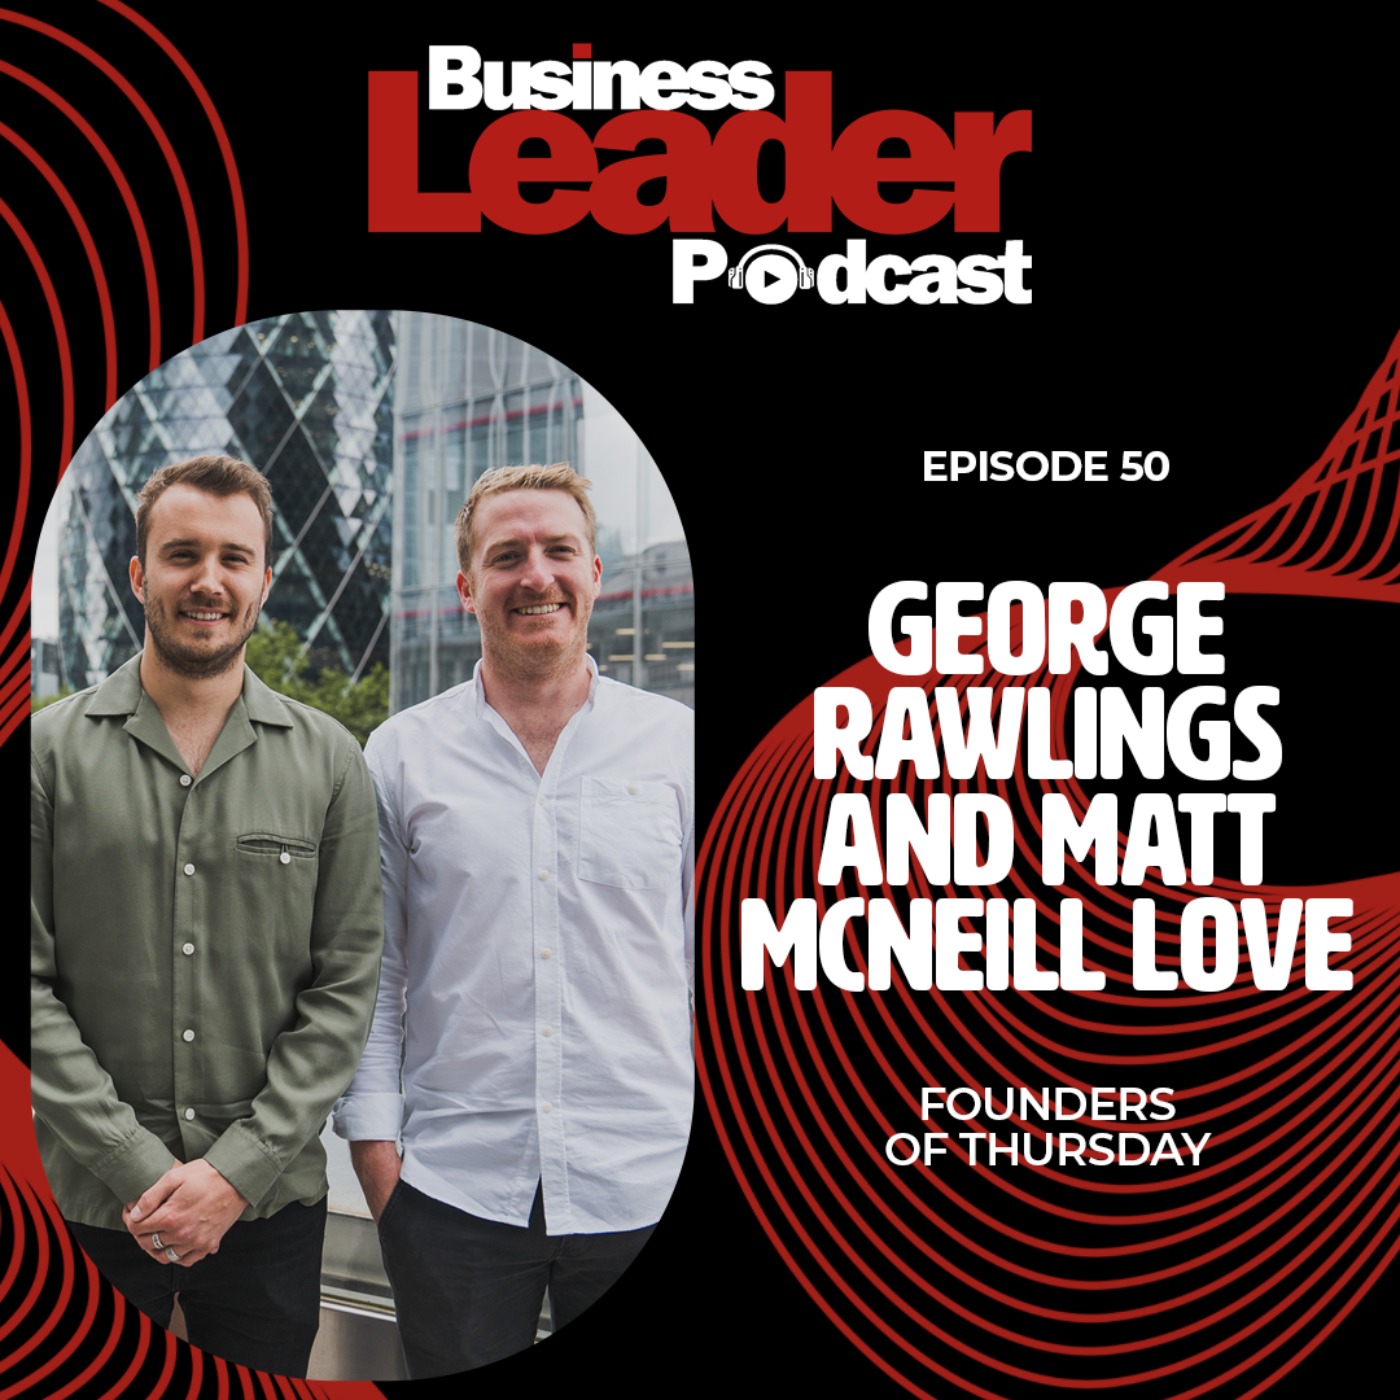 George Rawlings and Matt McNeill Love: Founders of Thursday